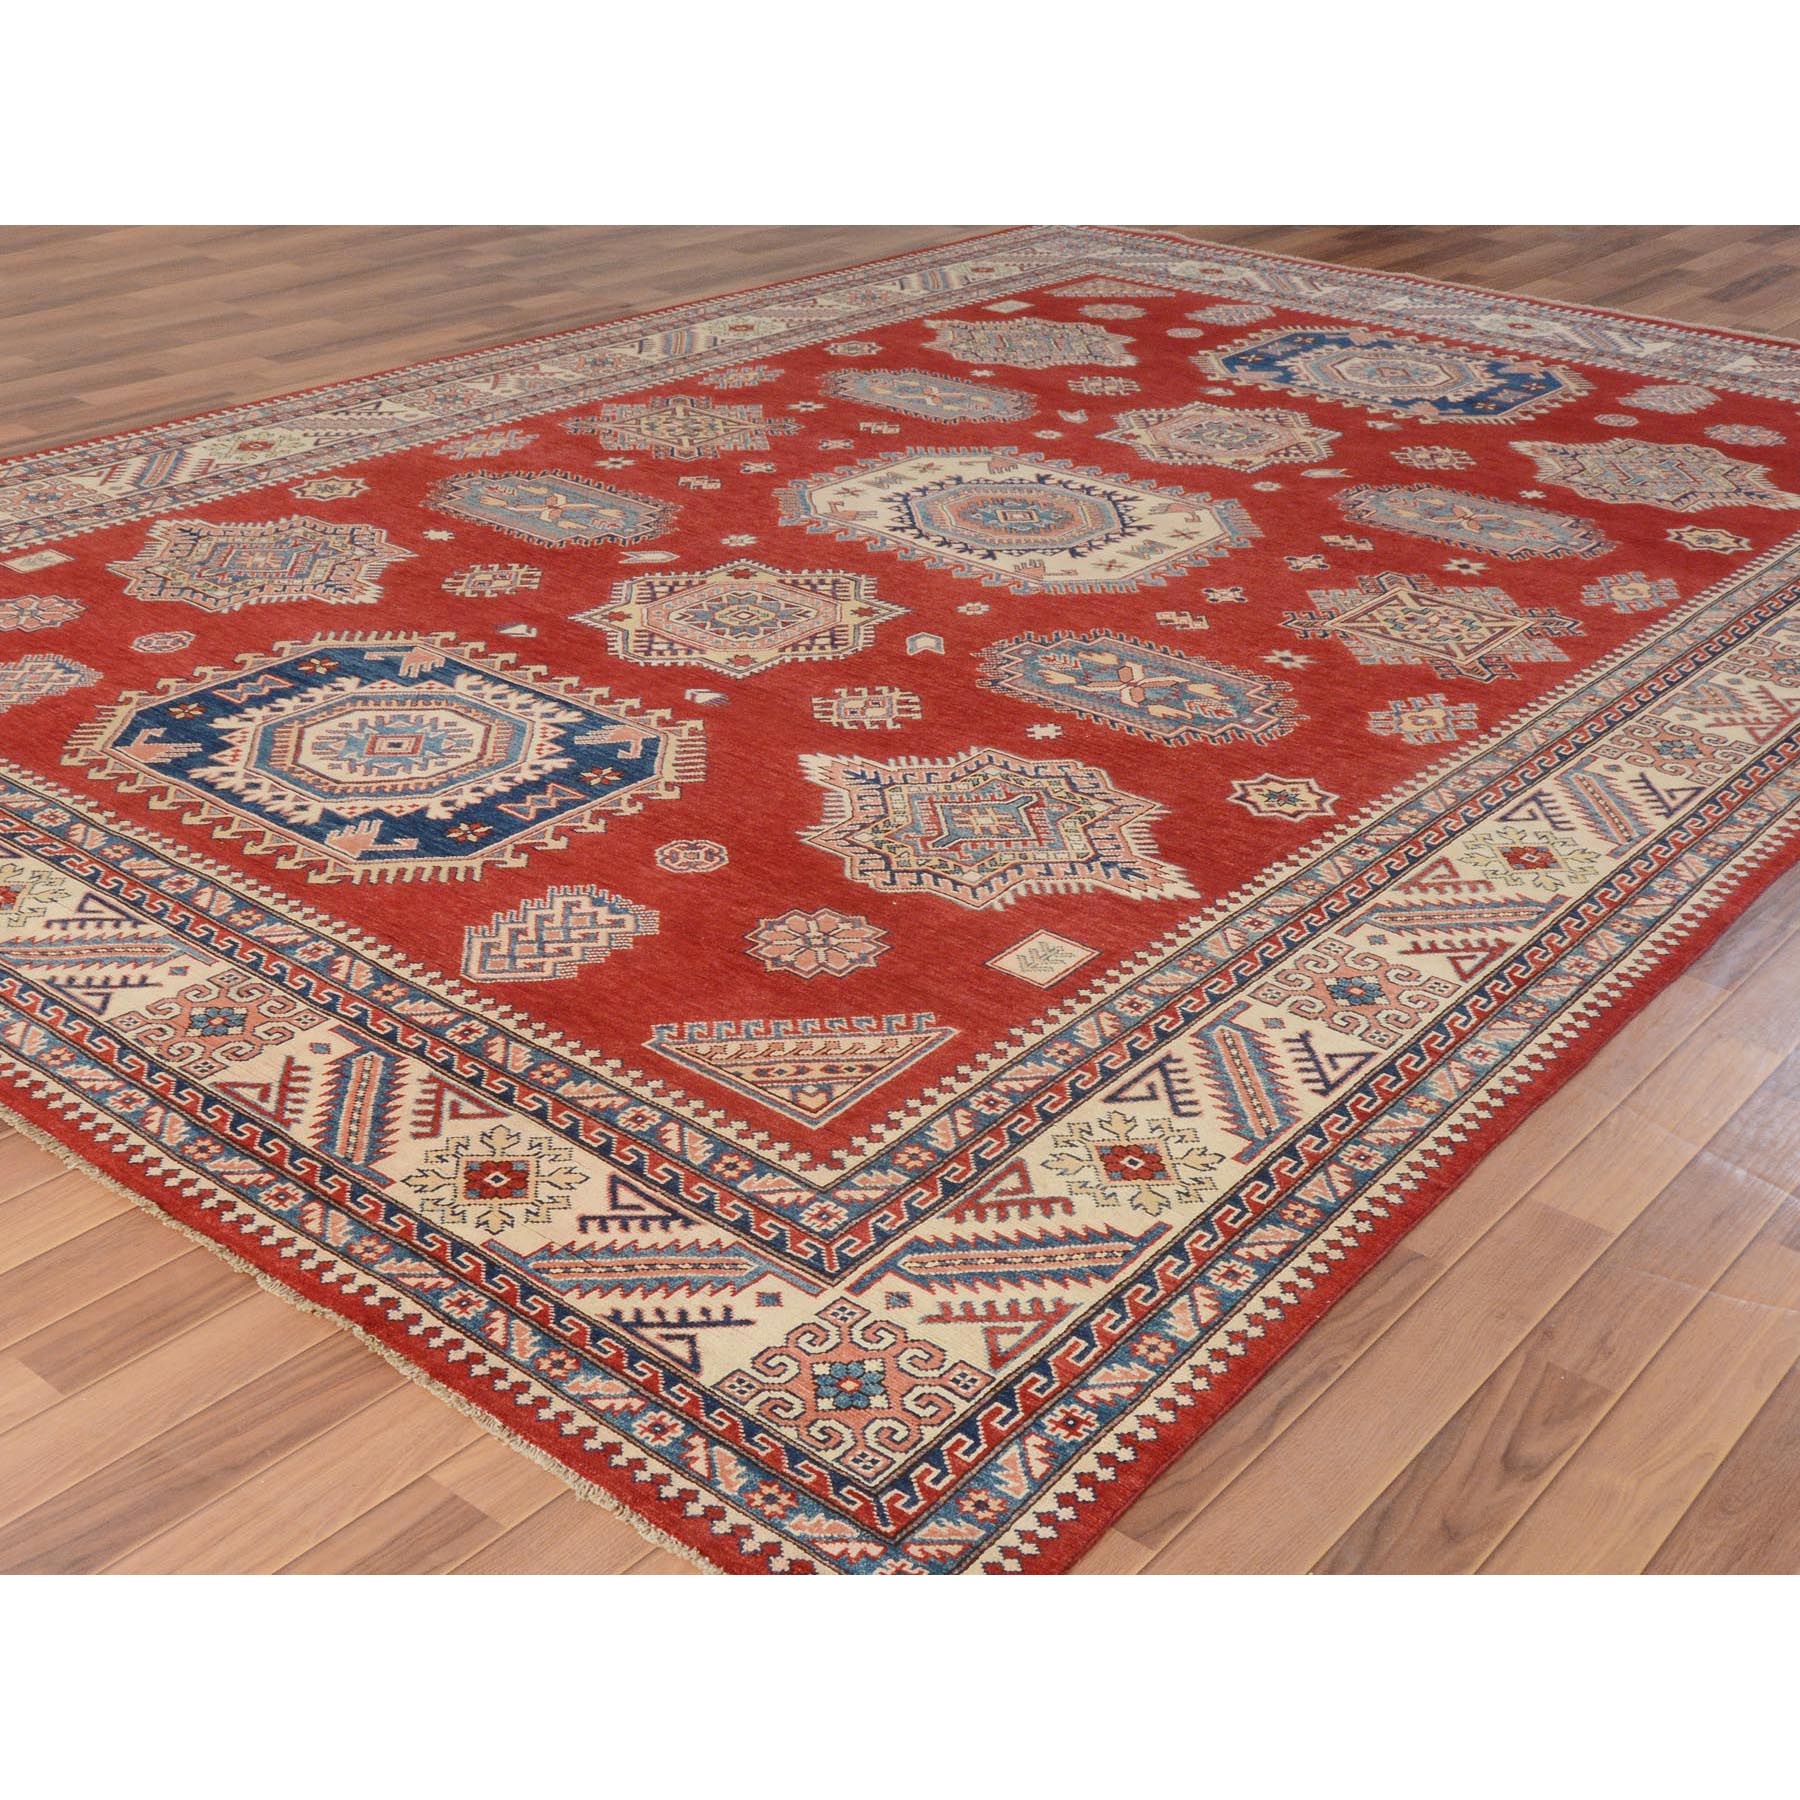 10-x13-10   Red Special Kazak Tribal Design Pure Wool Hand Knotted Oriental Rug 